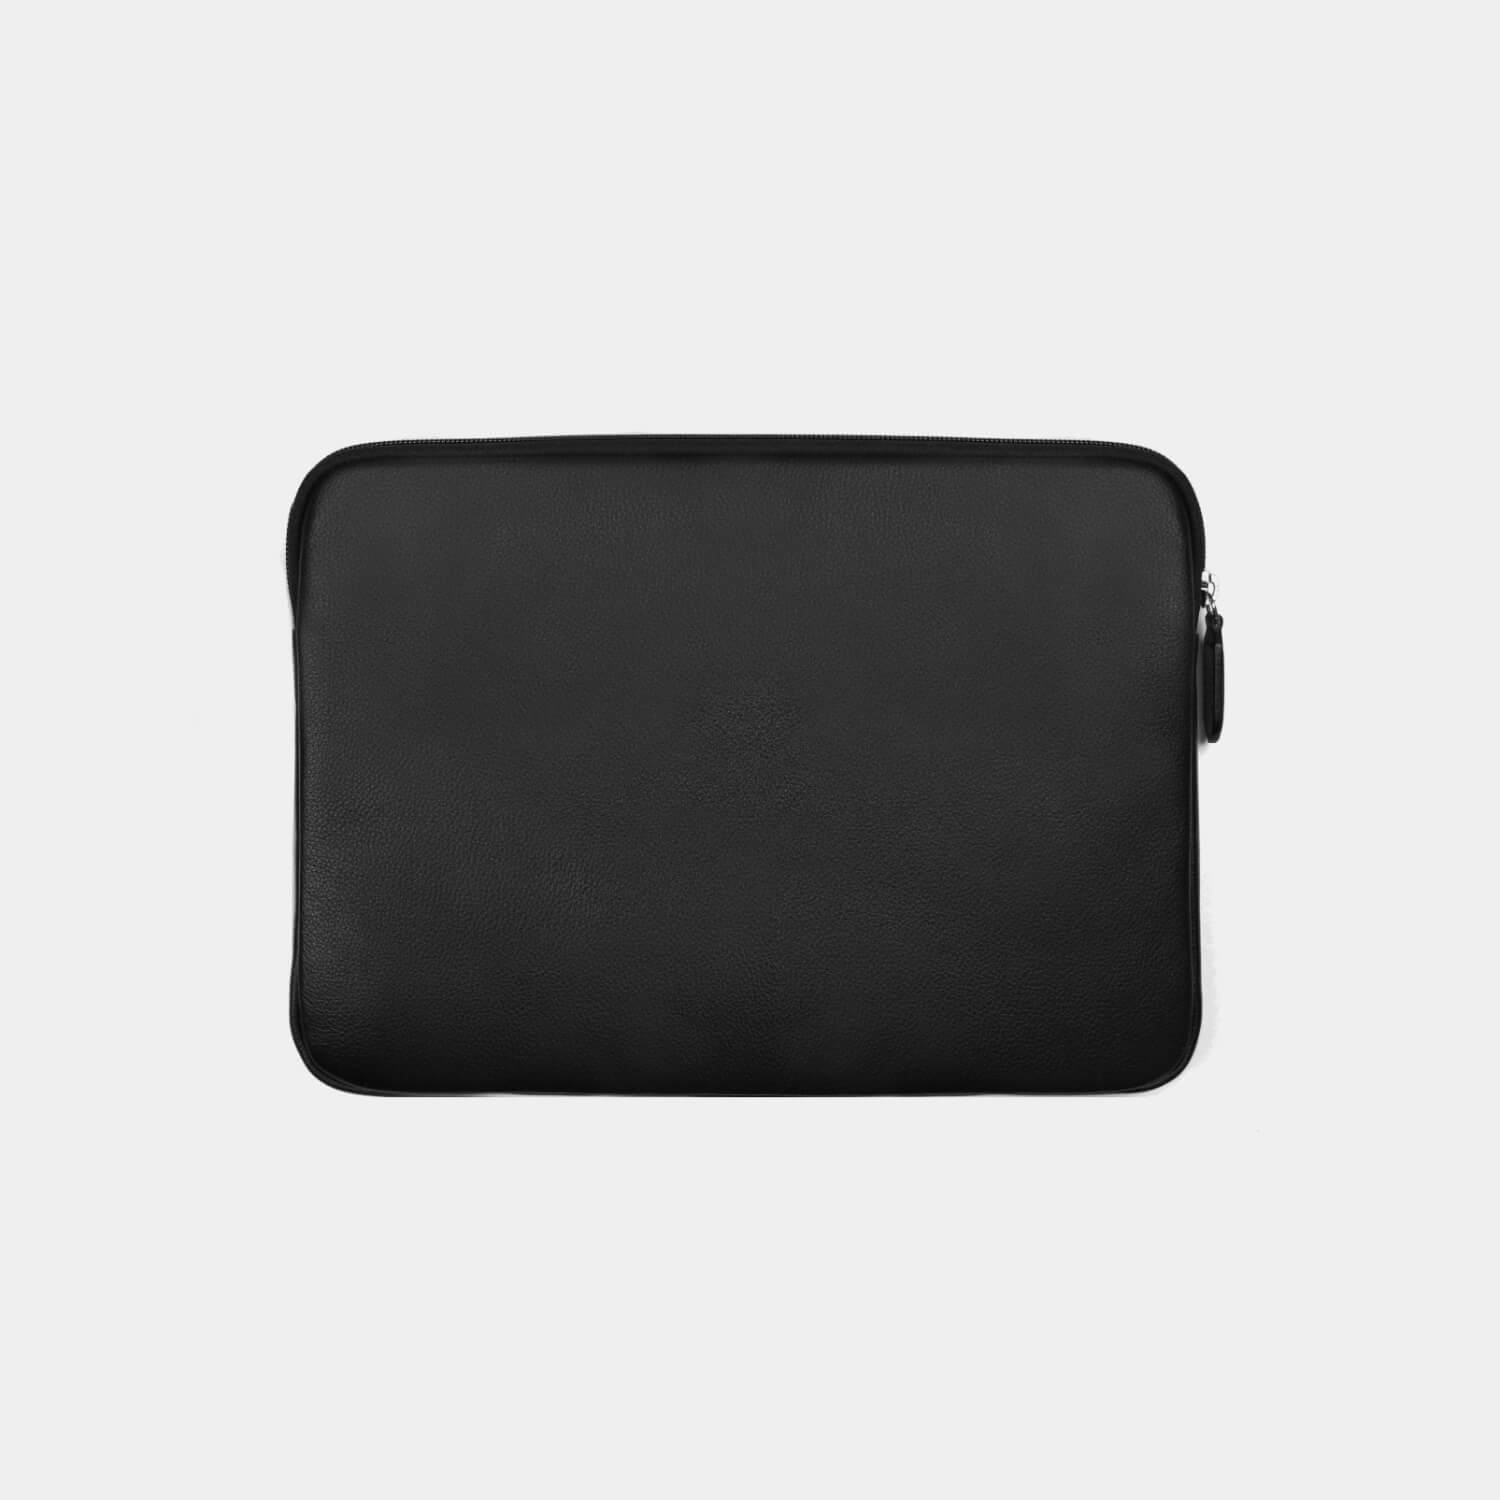 Fine grain leather laptop case with nylon zip and slip pocket on the inside